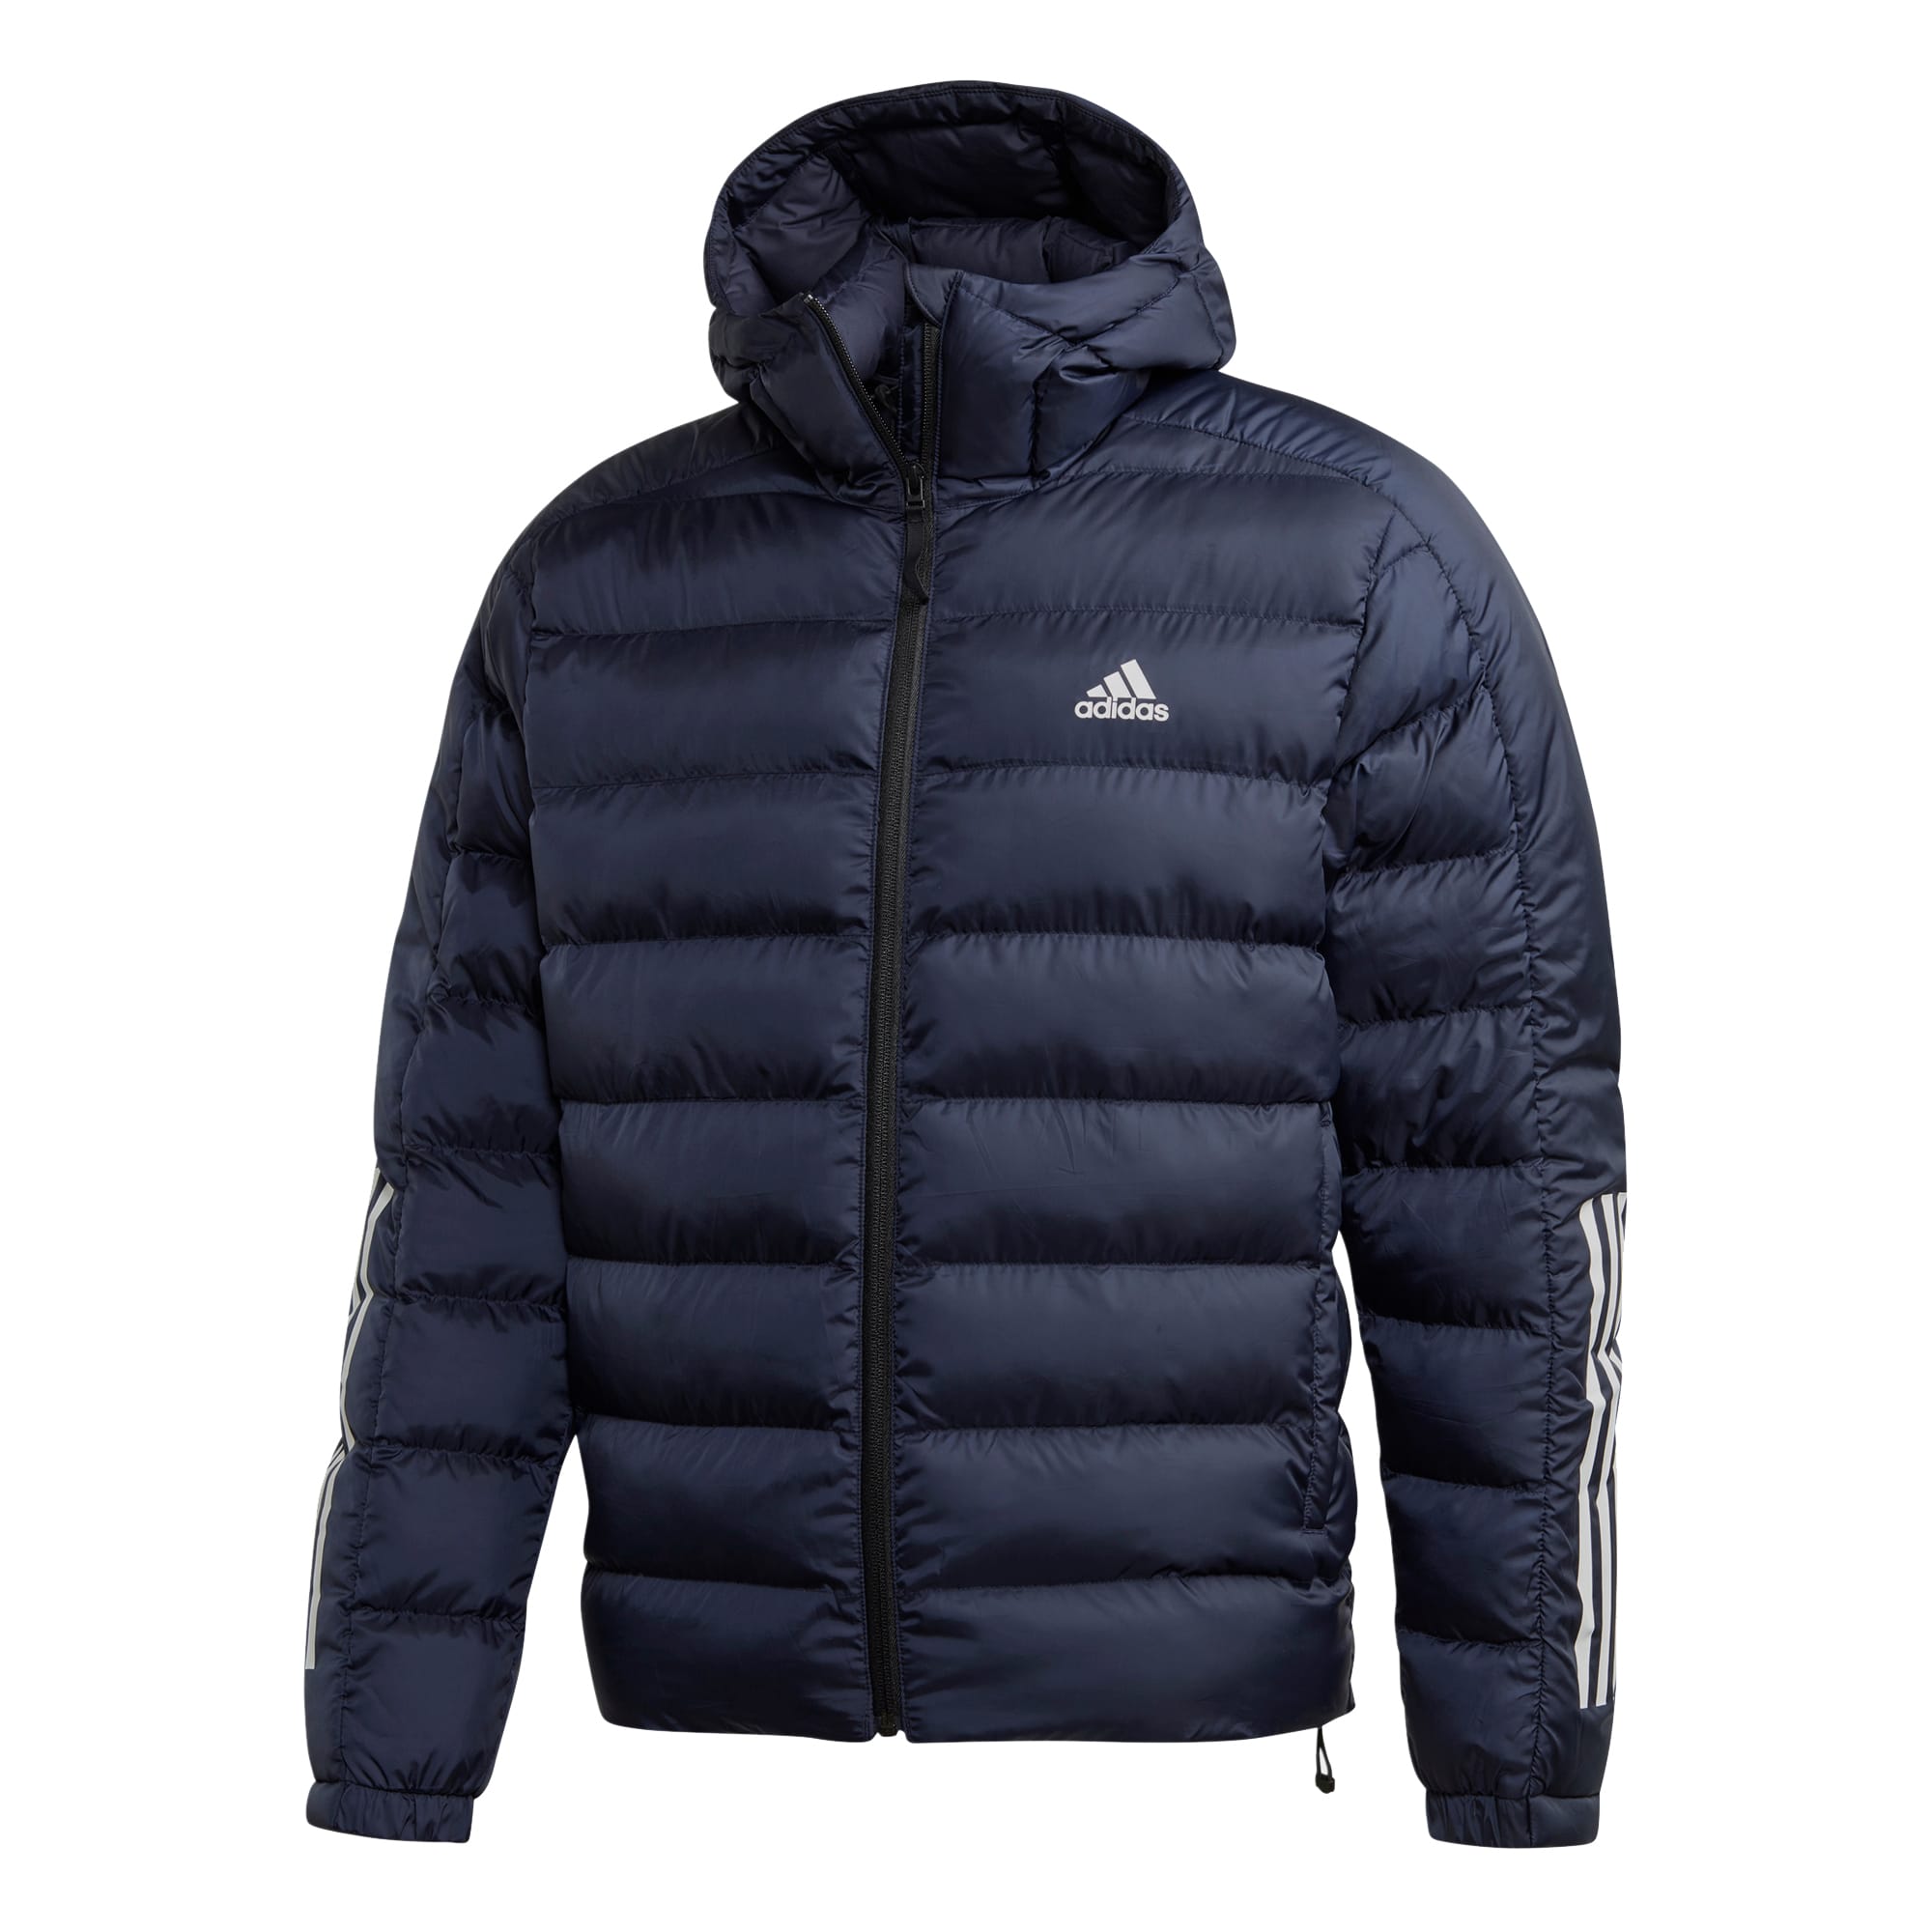 Buy ADIDAS Men's Itavic 3-Stripes 2.0 Winter Jacket from Outnorth